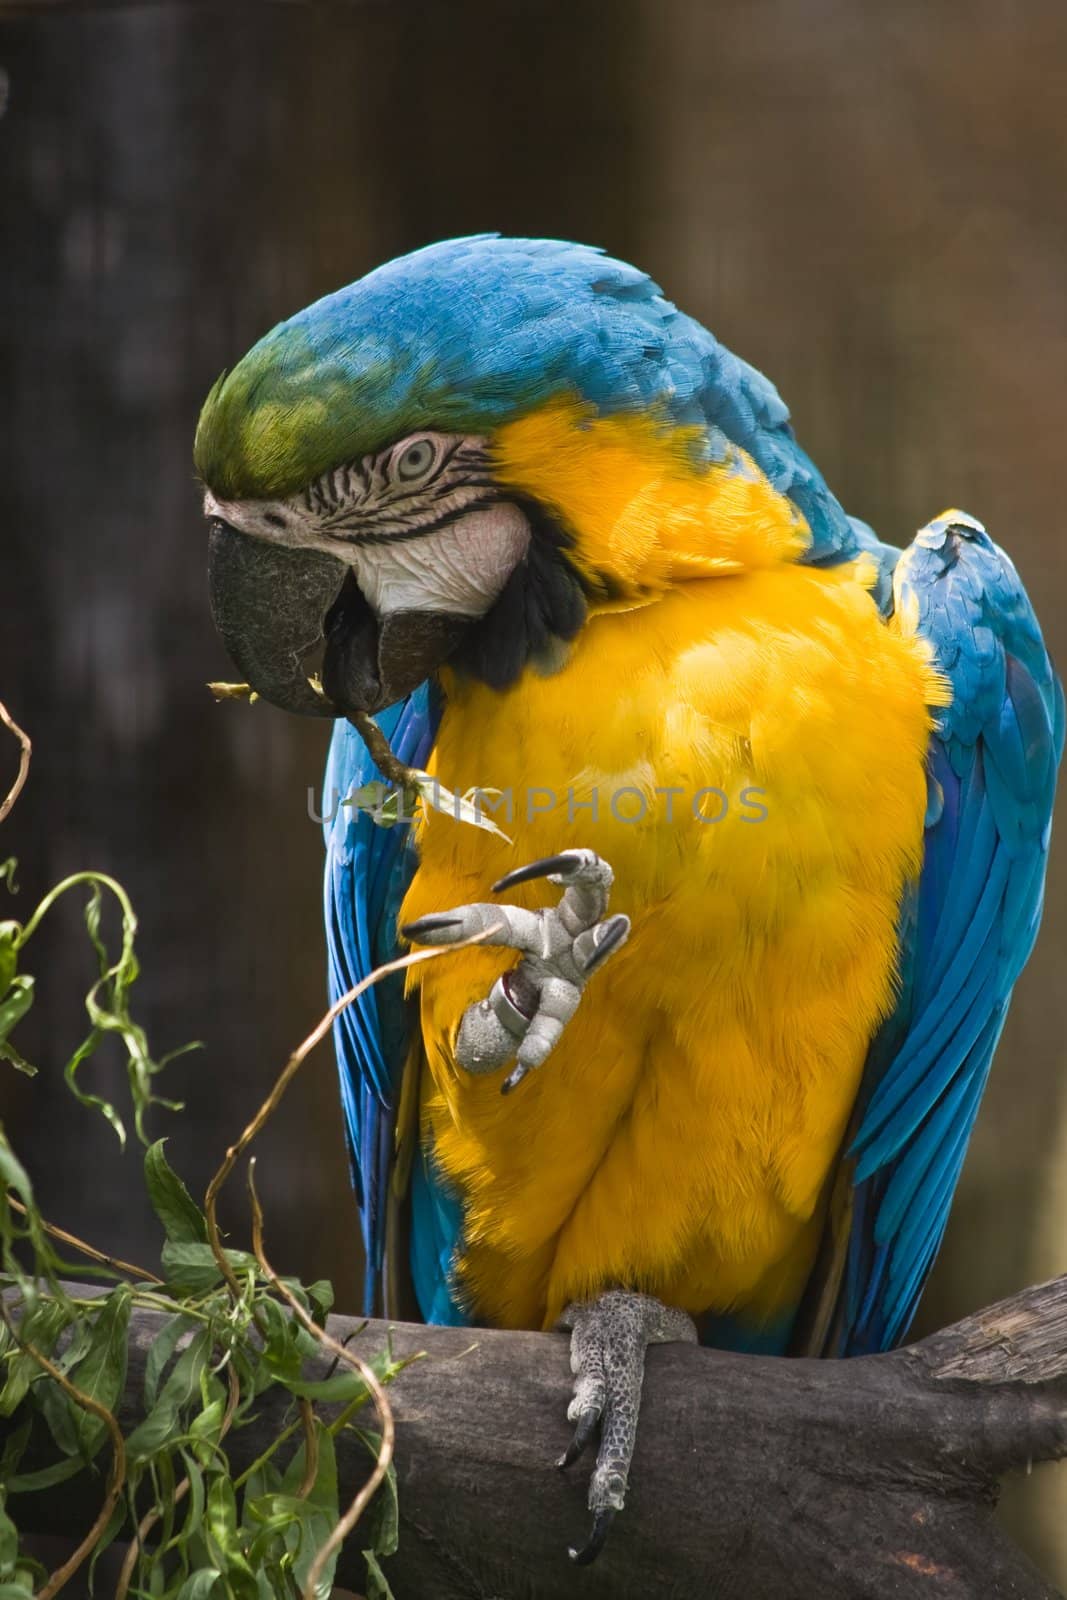 Yellow and blue parrot sitting on a branch, eating and looking